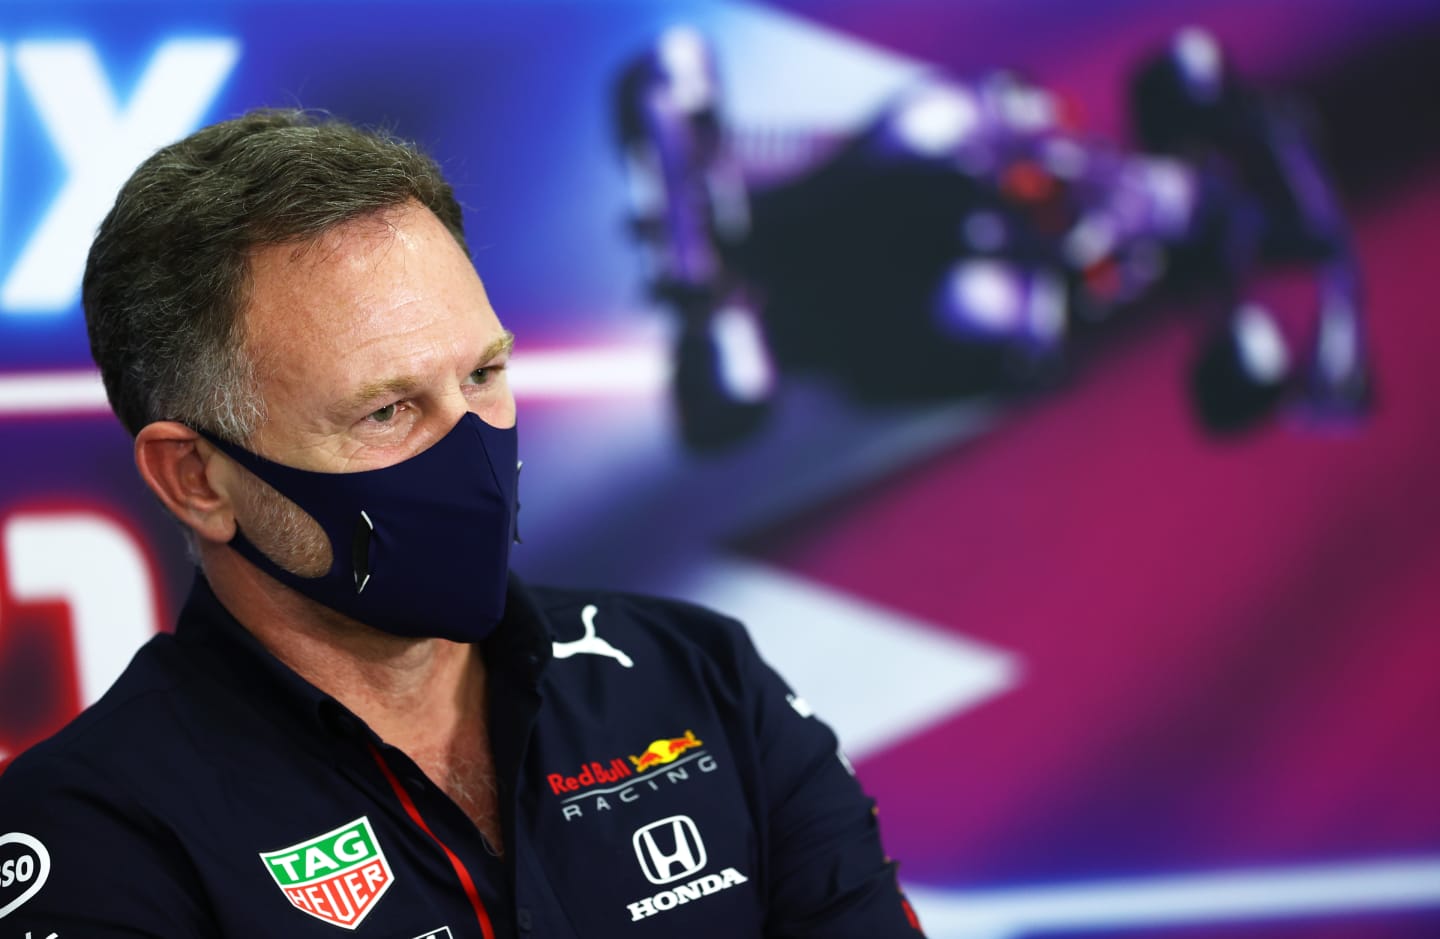 DOHA, QATAR - NOVEMBER 19: Red Bull Racing Team Principal Christian Horner talks in the Team Principals Press Conference during practice ahead of the F1 Grand Prix of Qatar at Losail International Circuit on November 19, 2021 in Doha, Qatar. (Photo by Dan Istitene/Getty Images)